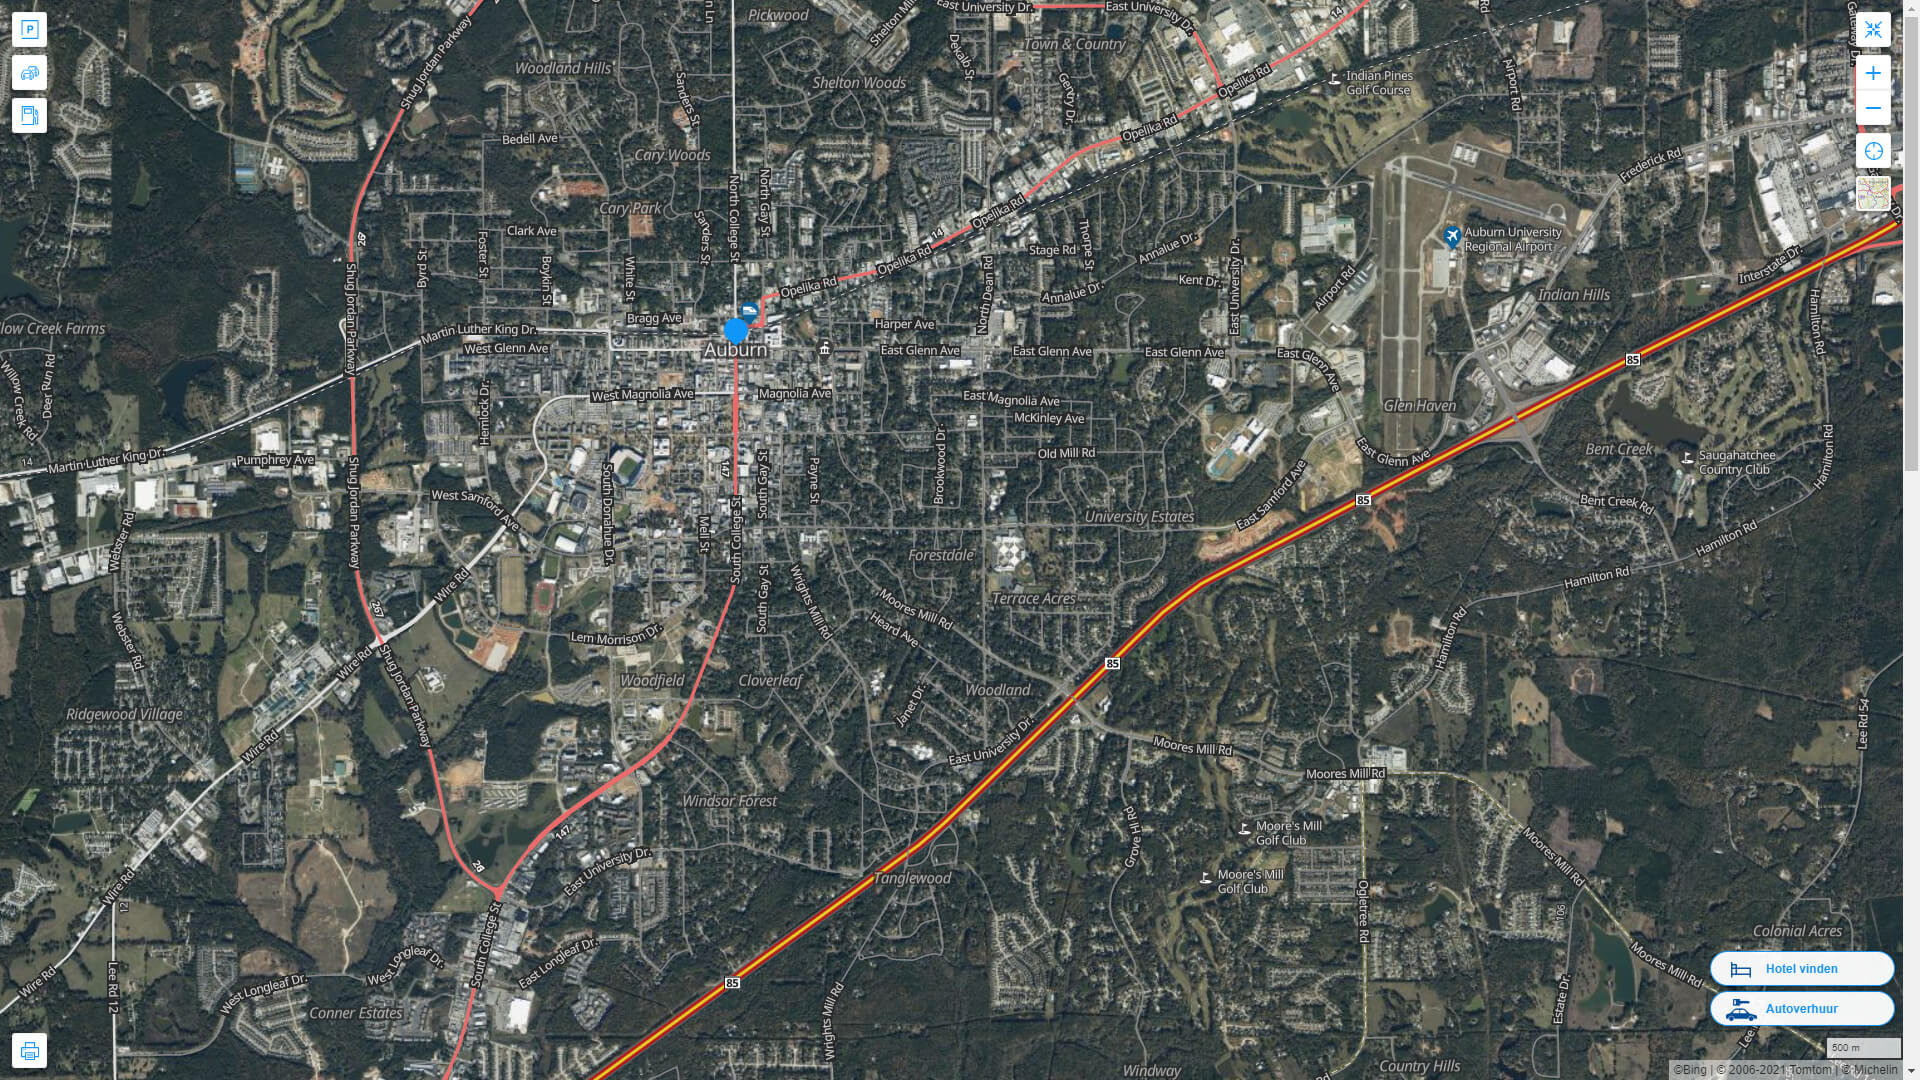 Main Road and Street Map of Auburn in Alabama